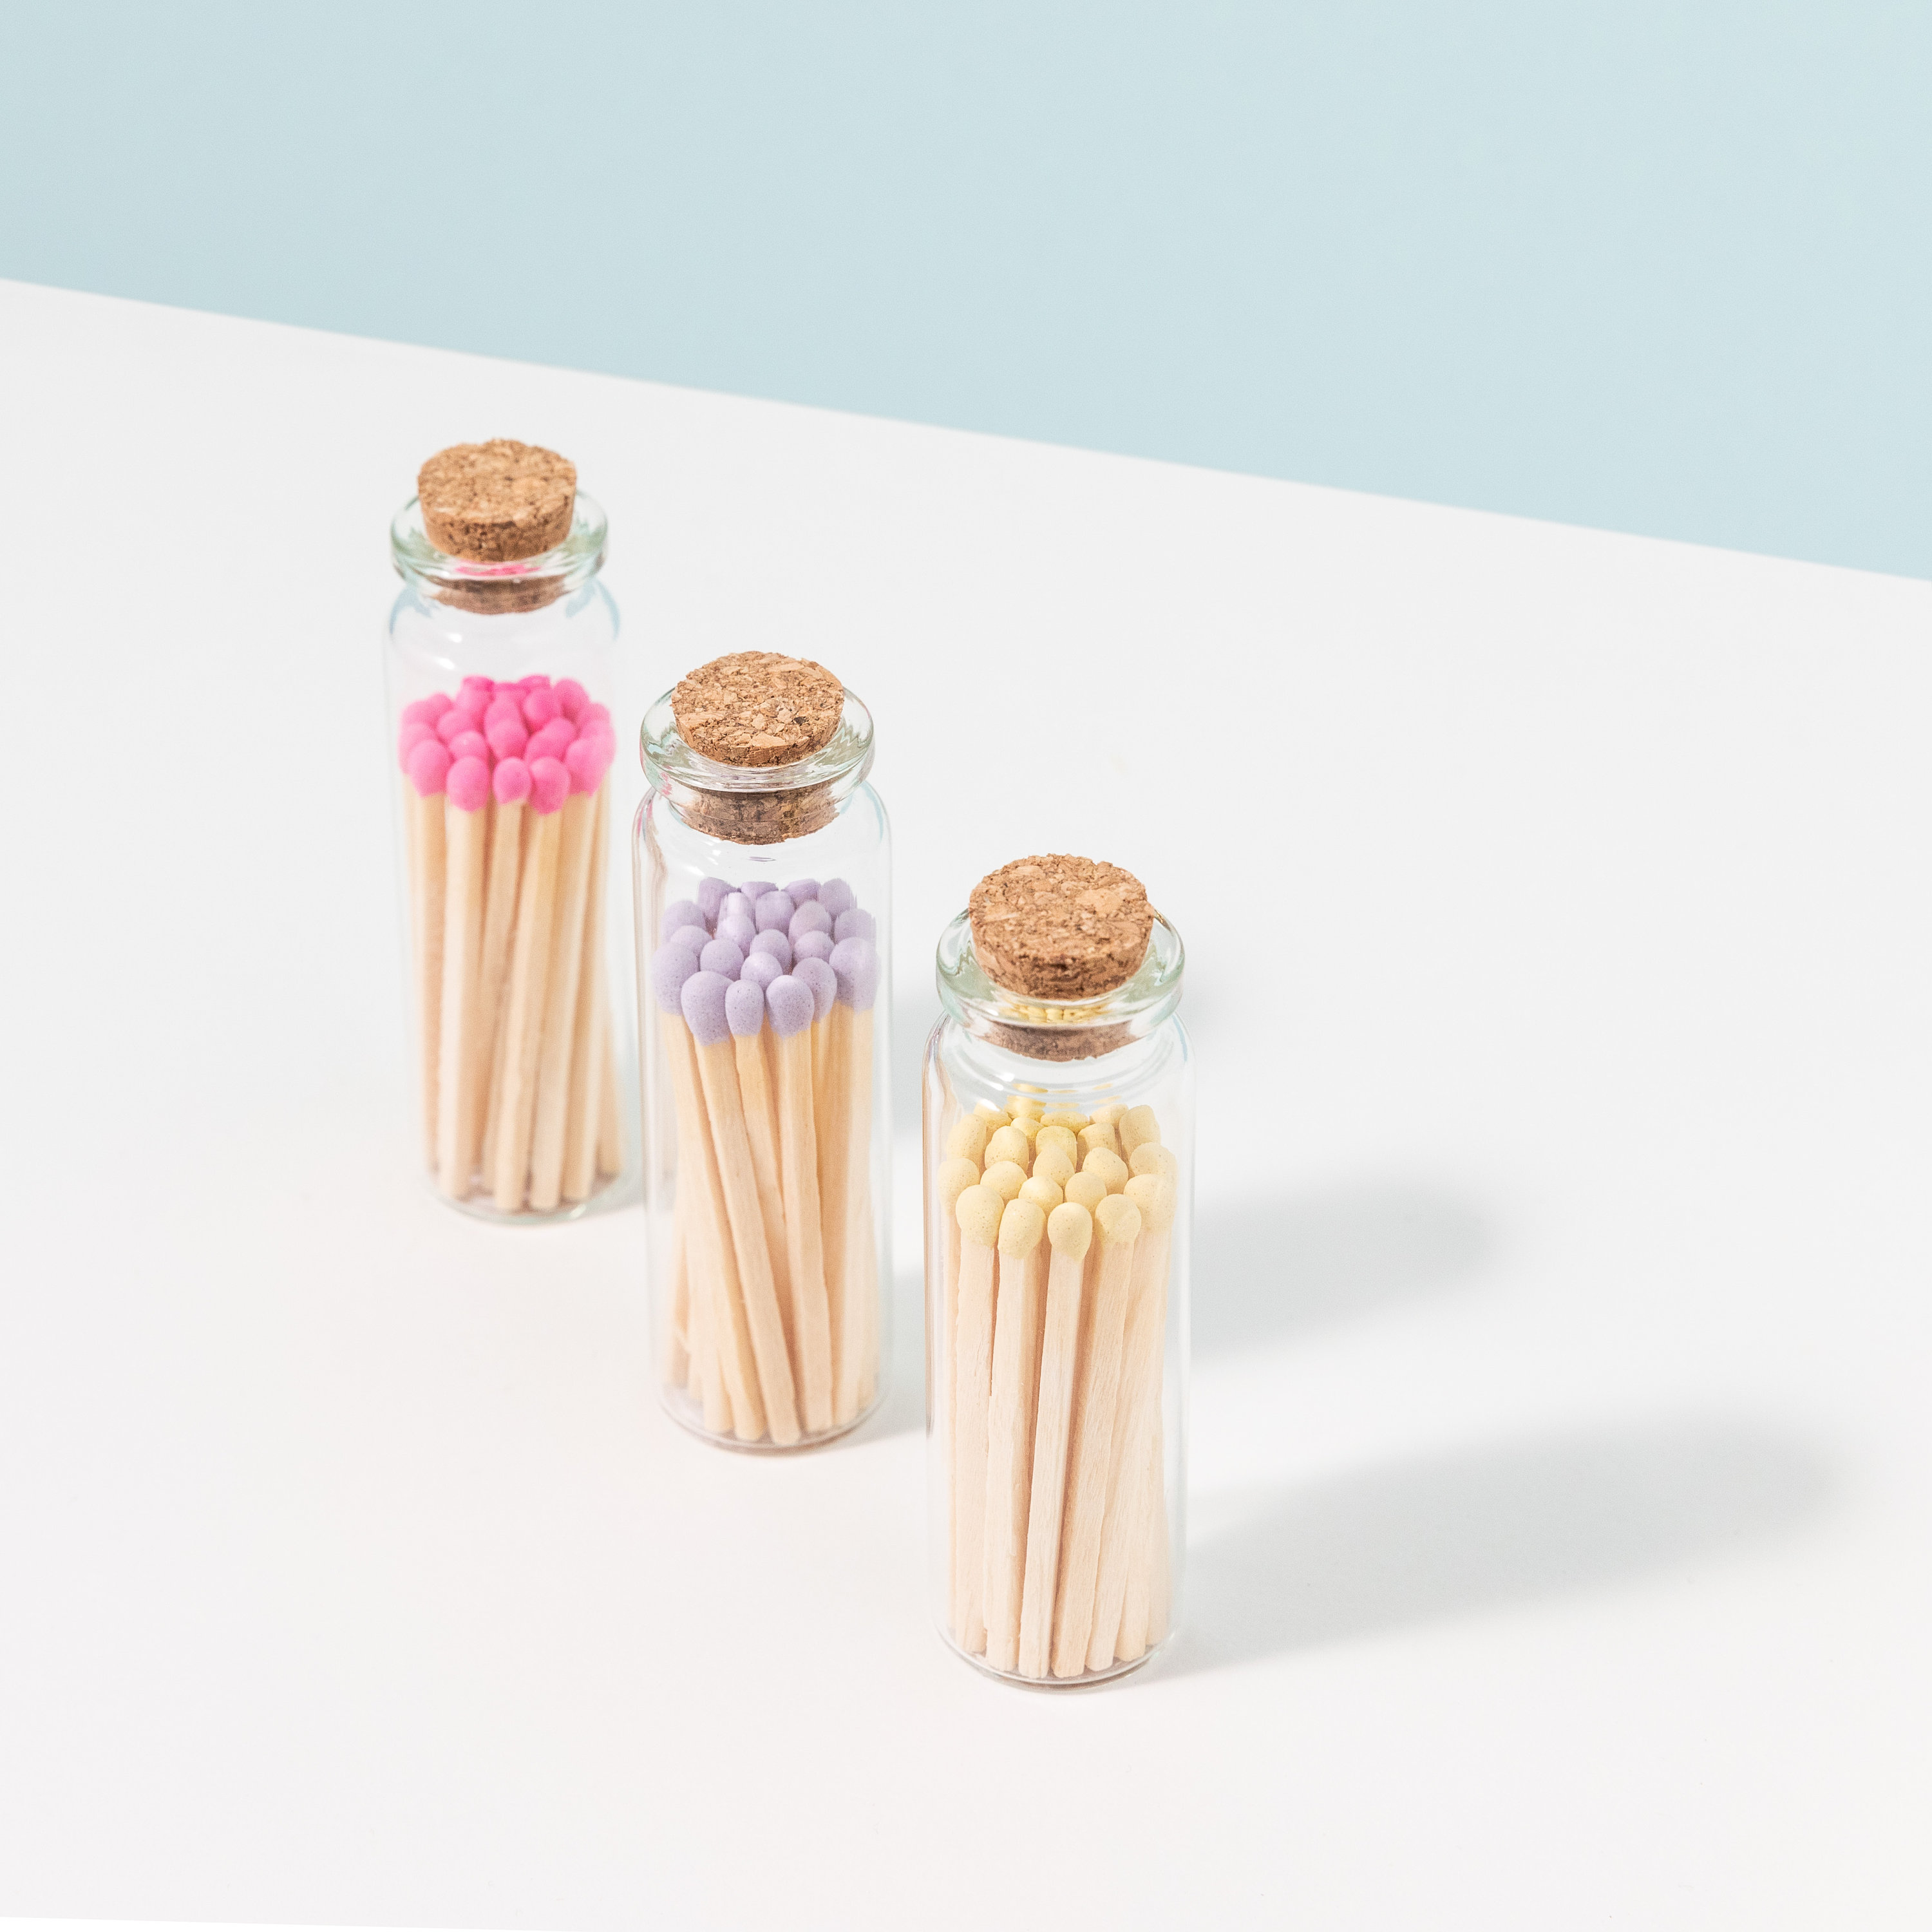 Light Up the Night - Colorful Matches in Glass Jar - Naked Eye Studio